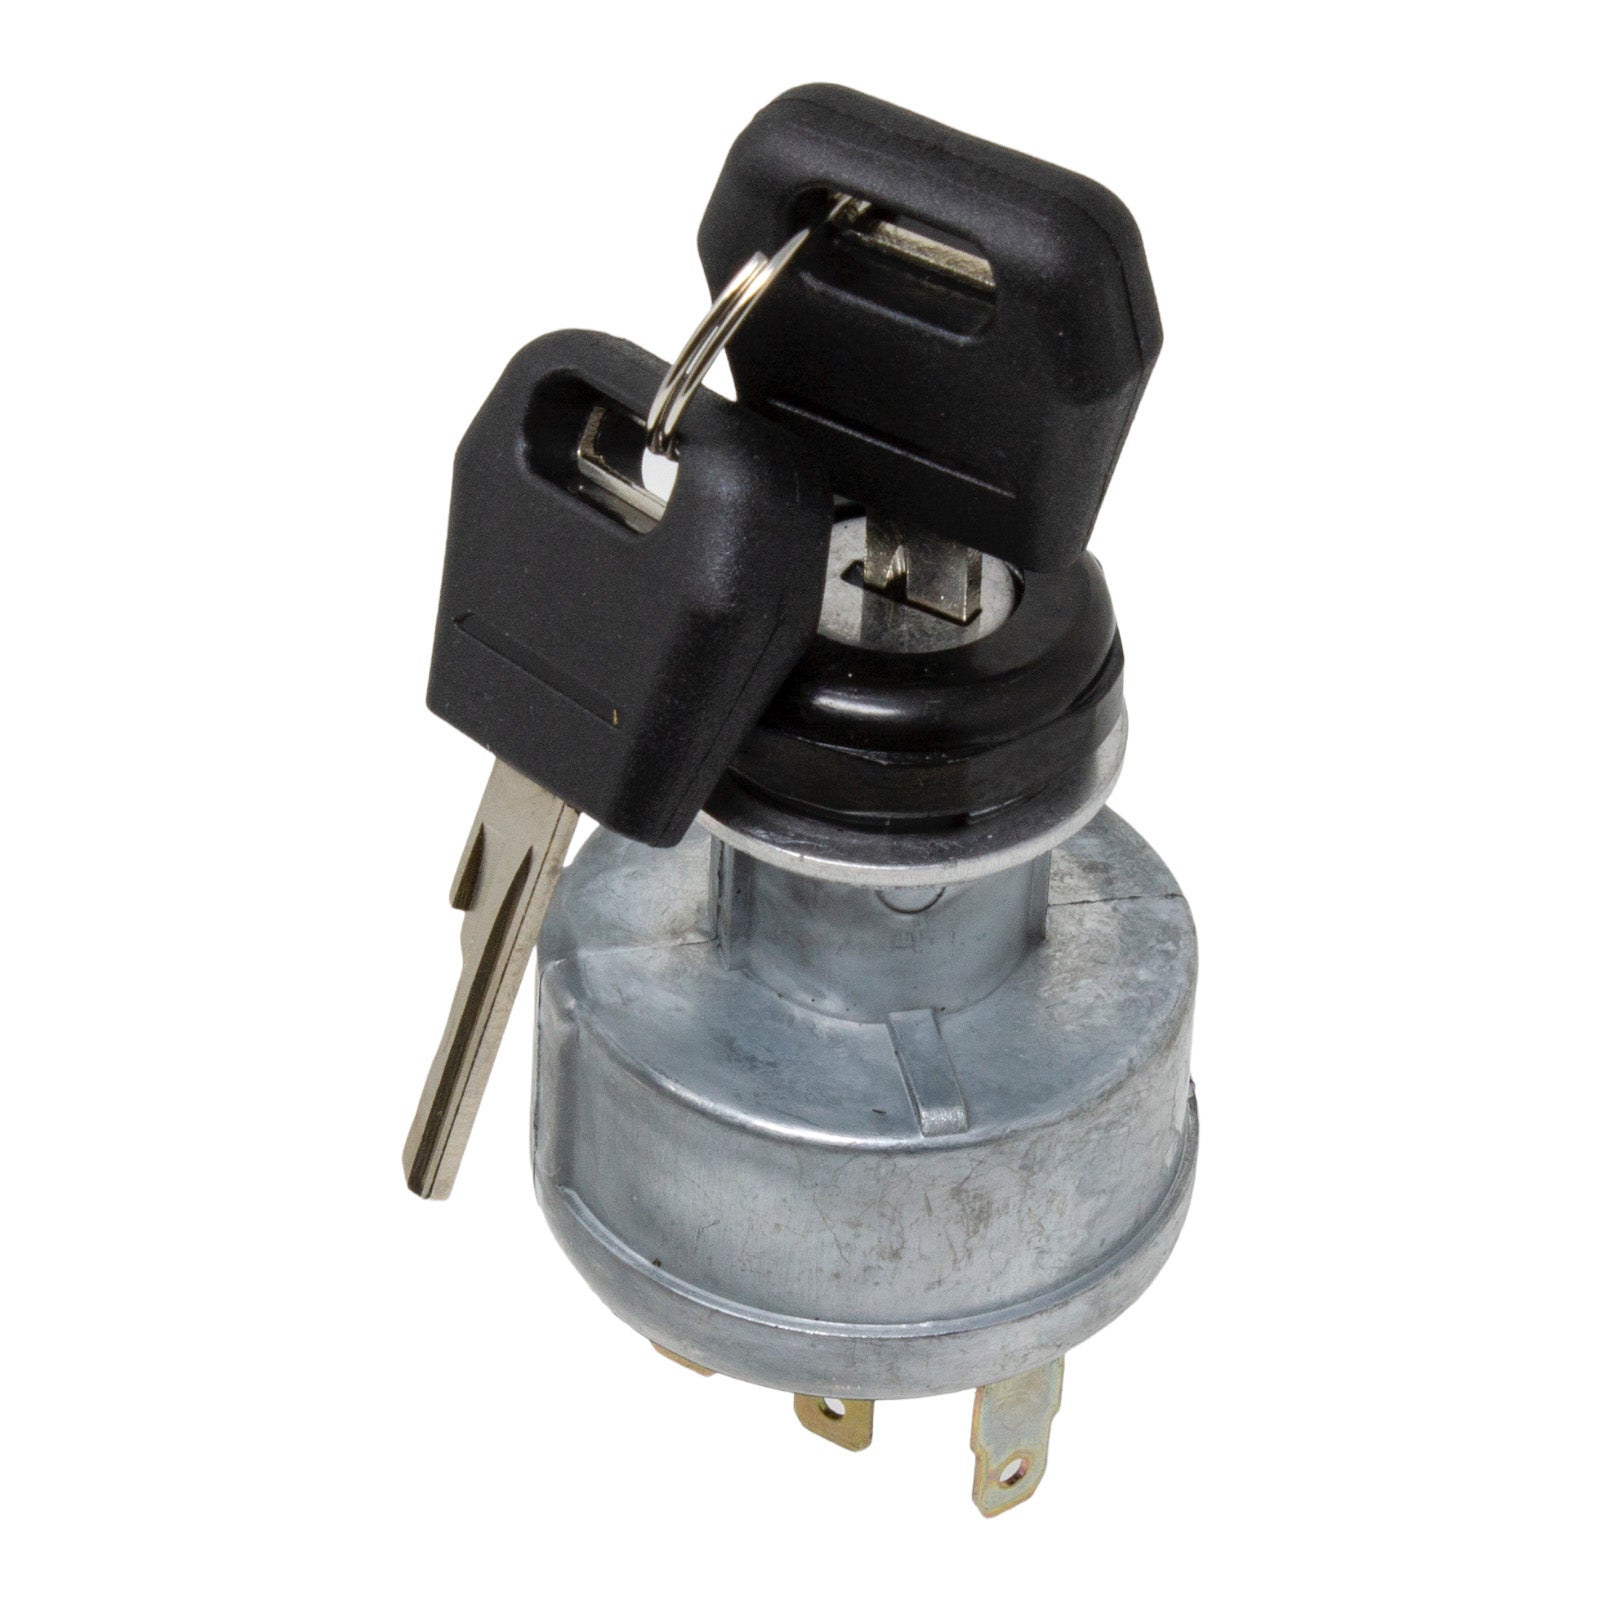 Duraforce 282775A1, Ignition Switch For Case IH